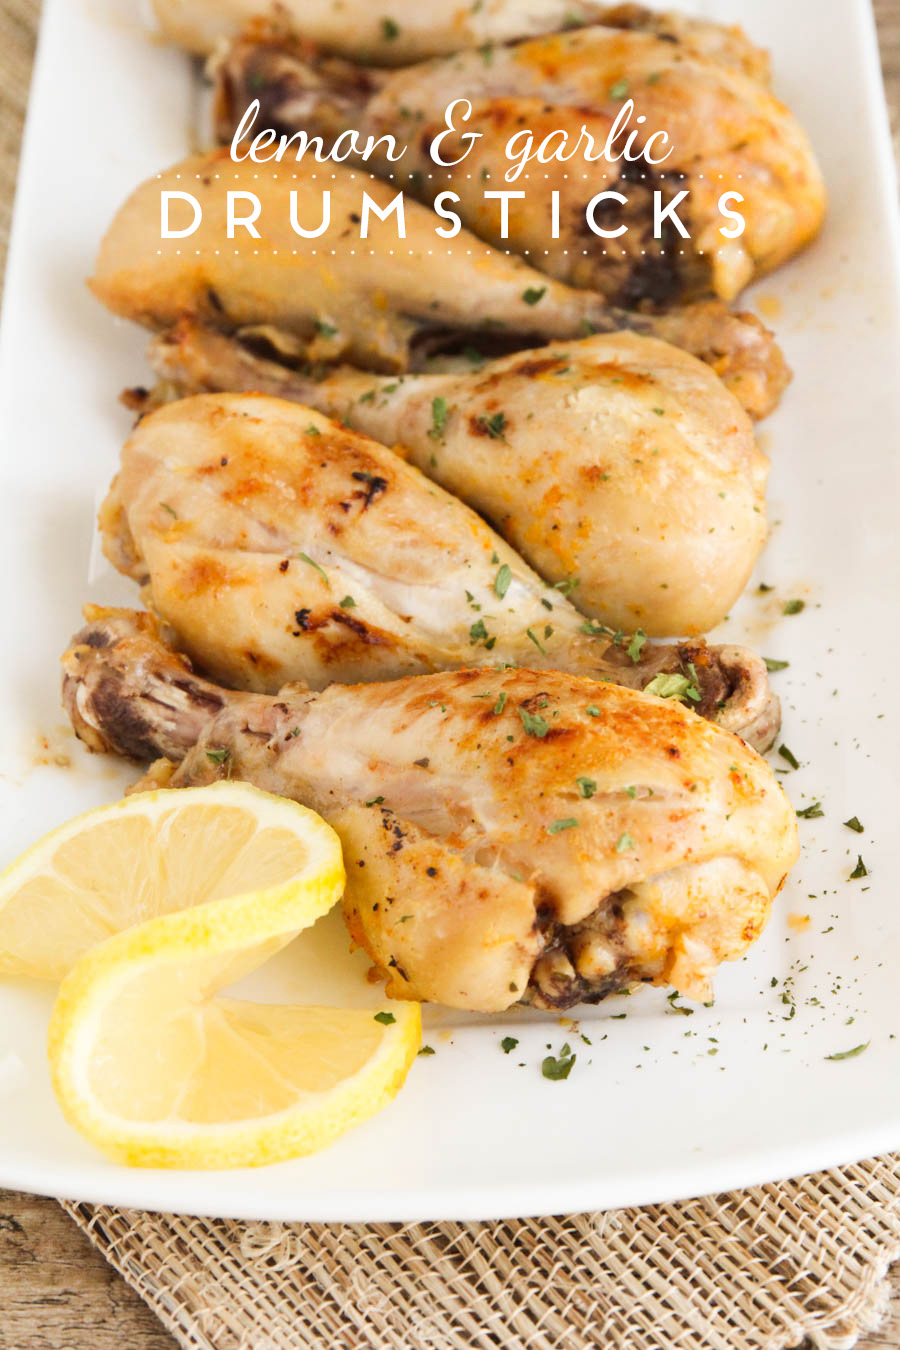 These lemon garlic drumsticks are savory and flavorful, and simple and easy to make. A delicious dinner the whole family will love!